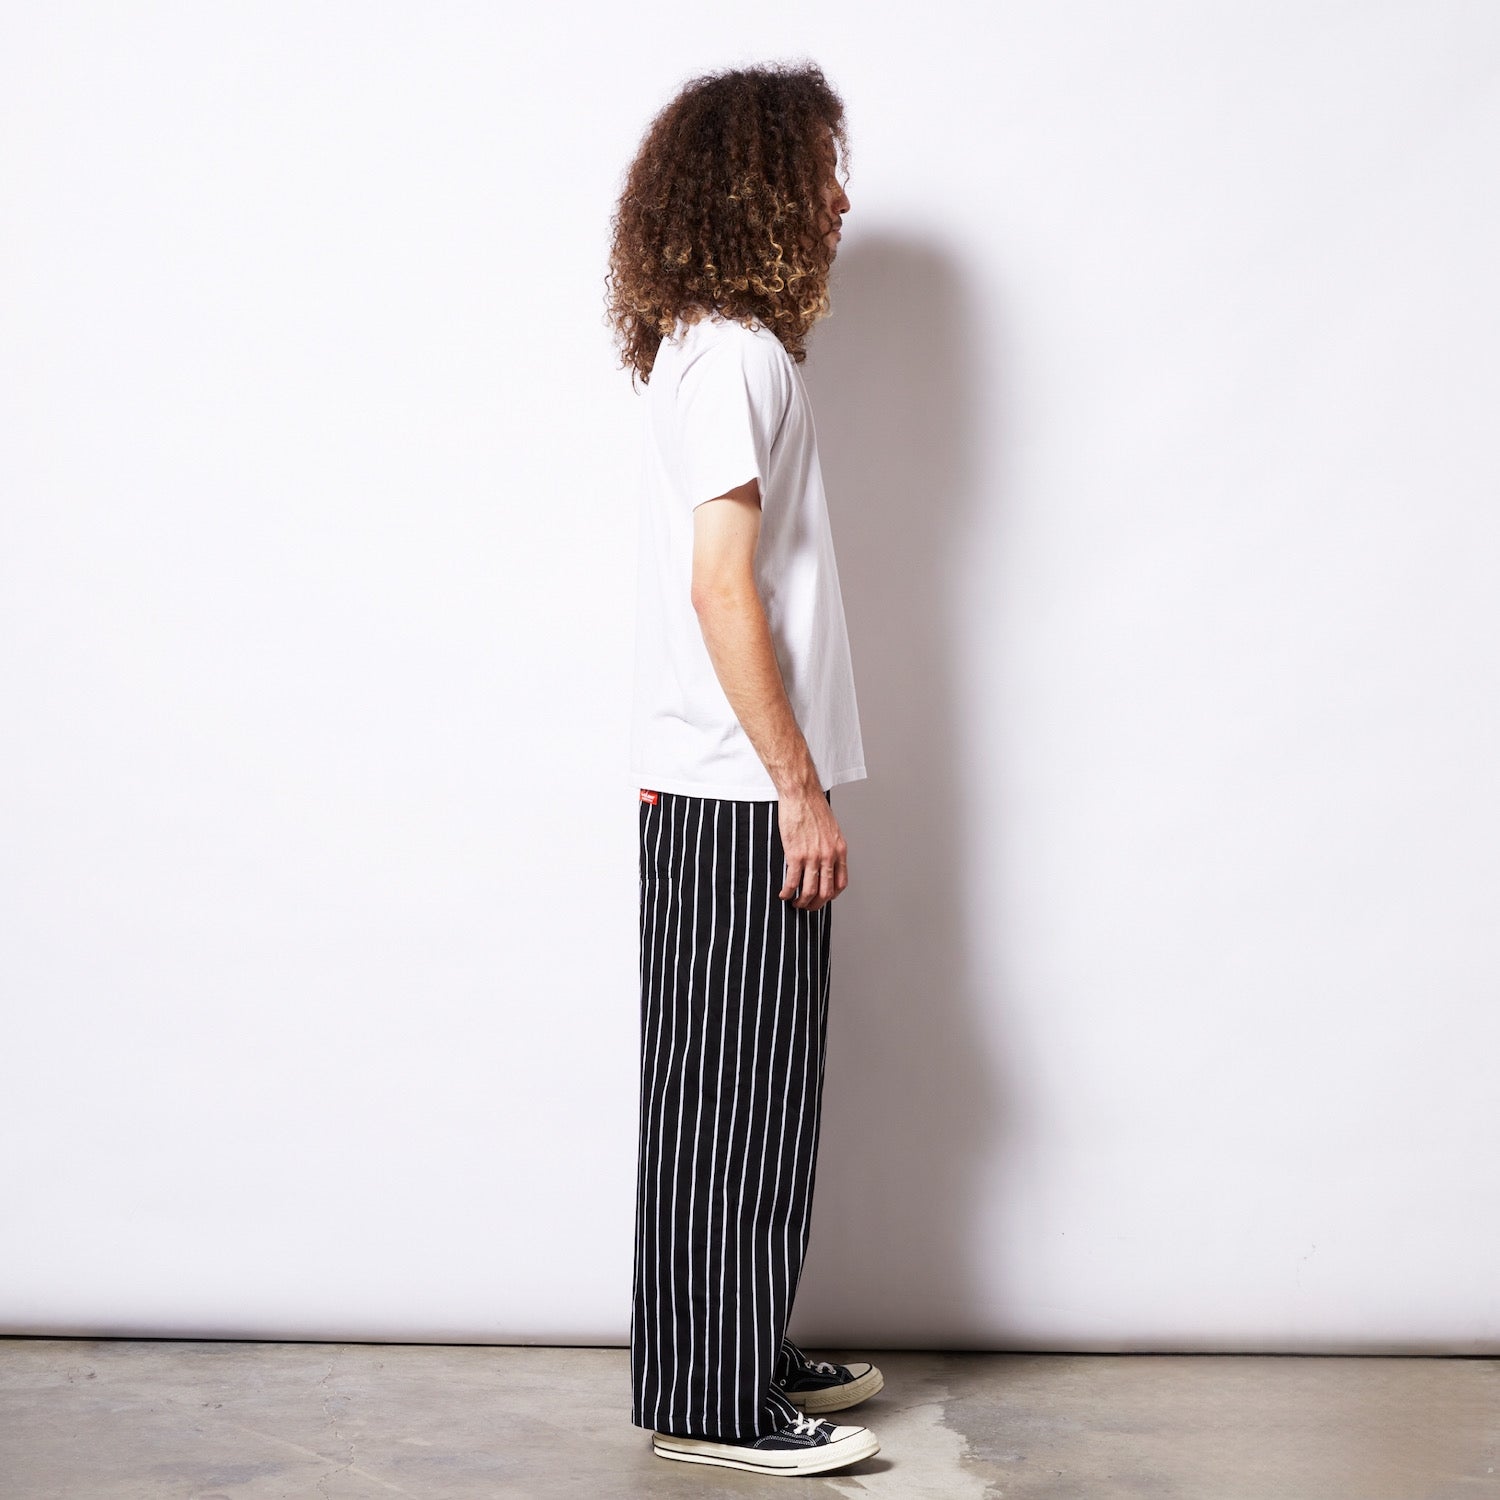 Wide Chef Pants